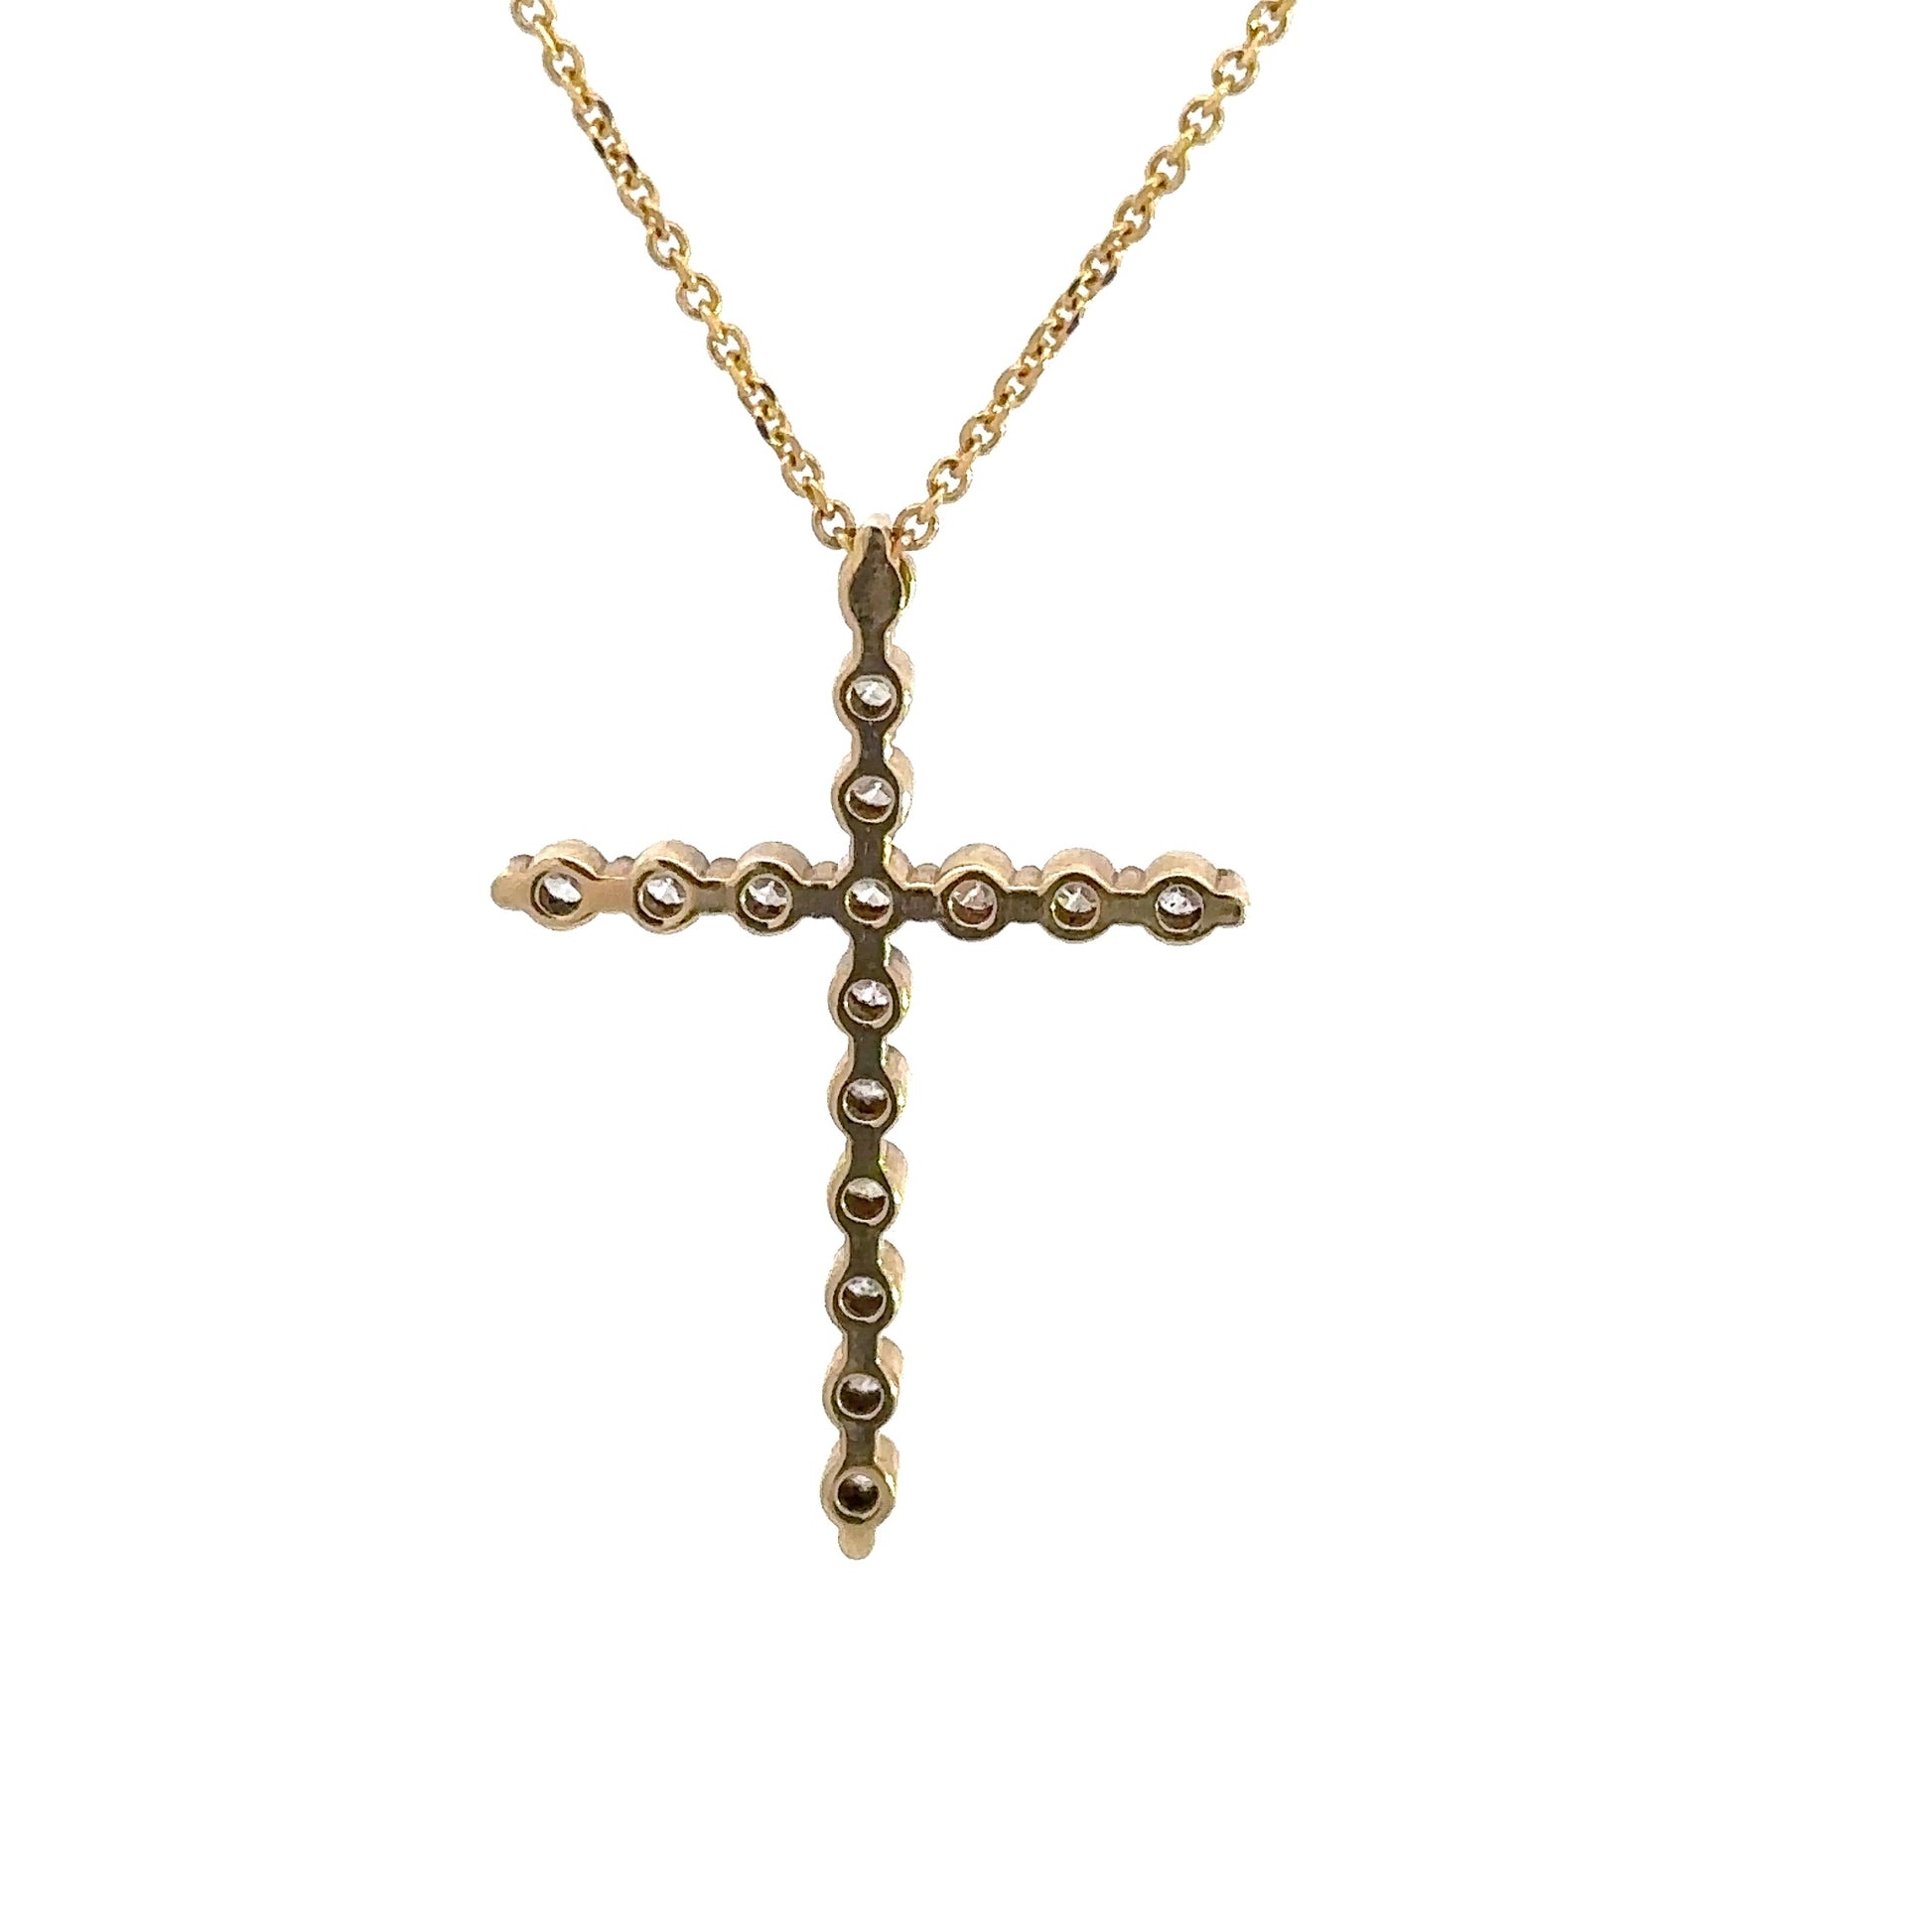 Back of cross with gold outline